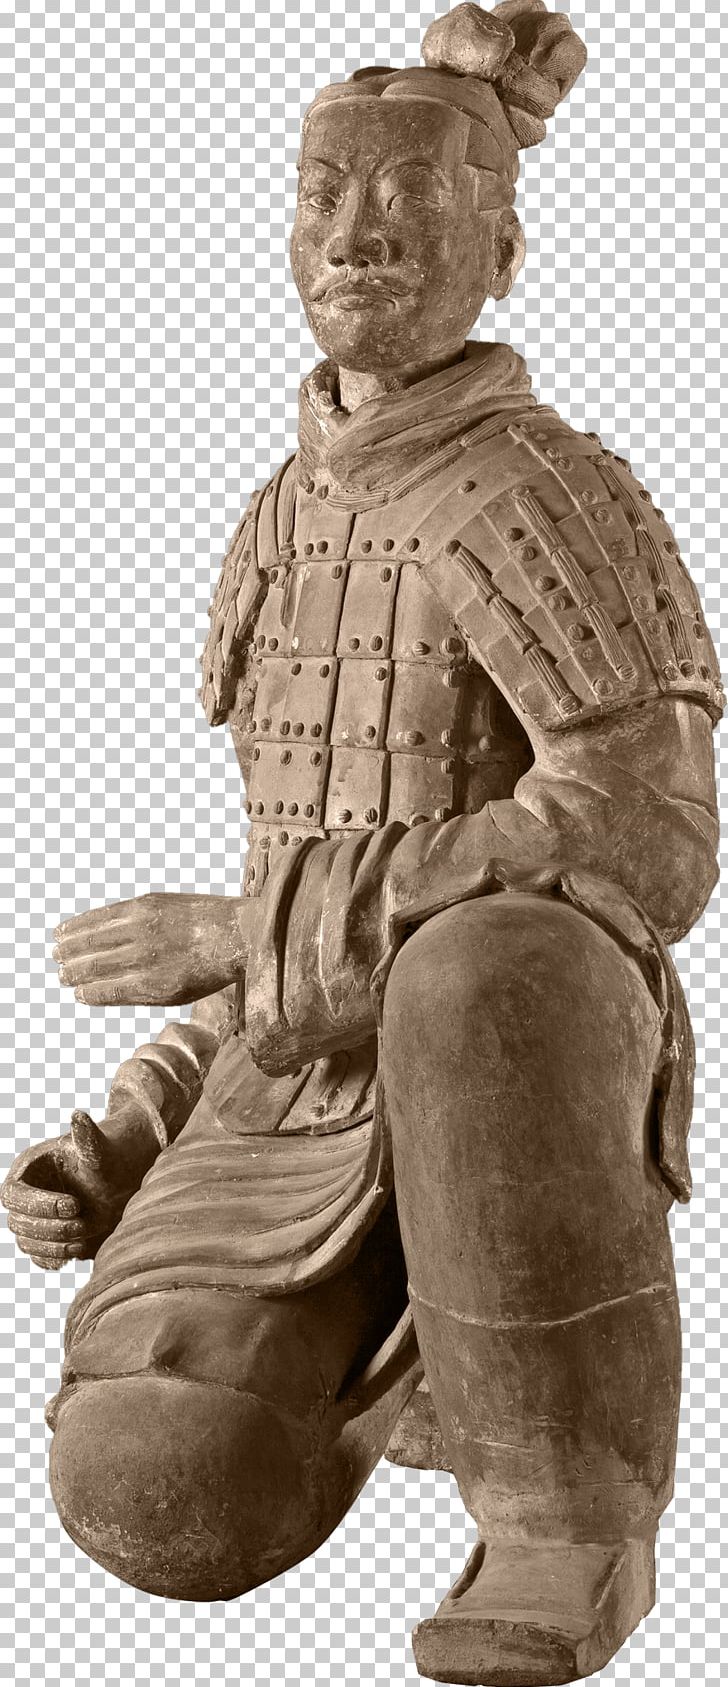 Terracotta Army Sculpture Mausoleum Of The First Qin Emperor PNG, Clipart, Ceramic Glaze, China, Chinese Art, Classical Sculpture, Figurine Free PNG Download